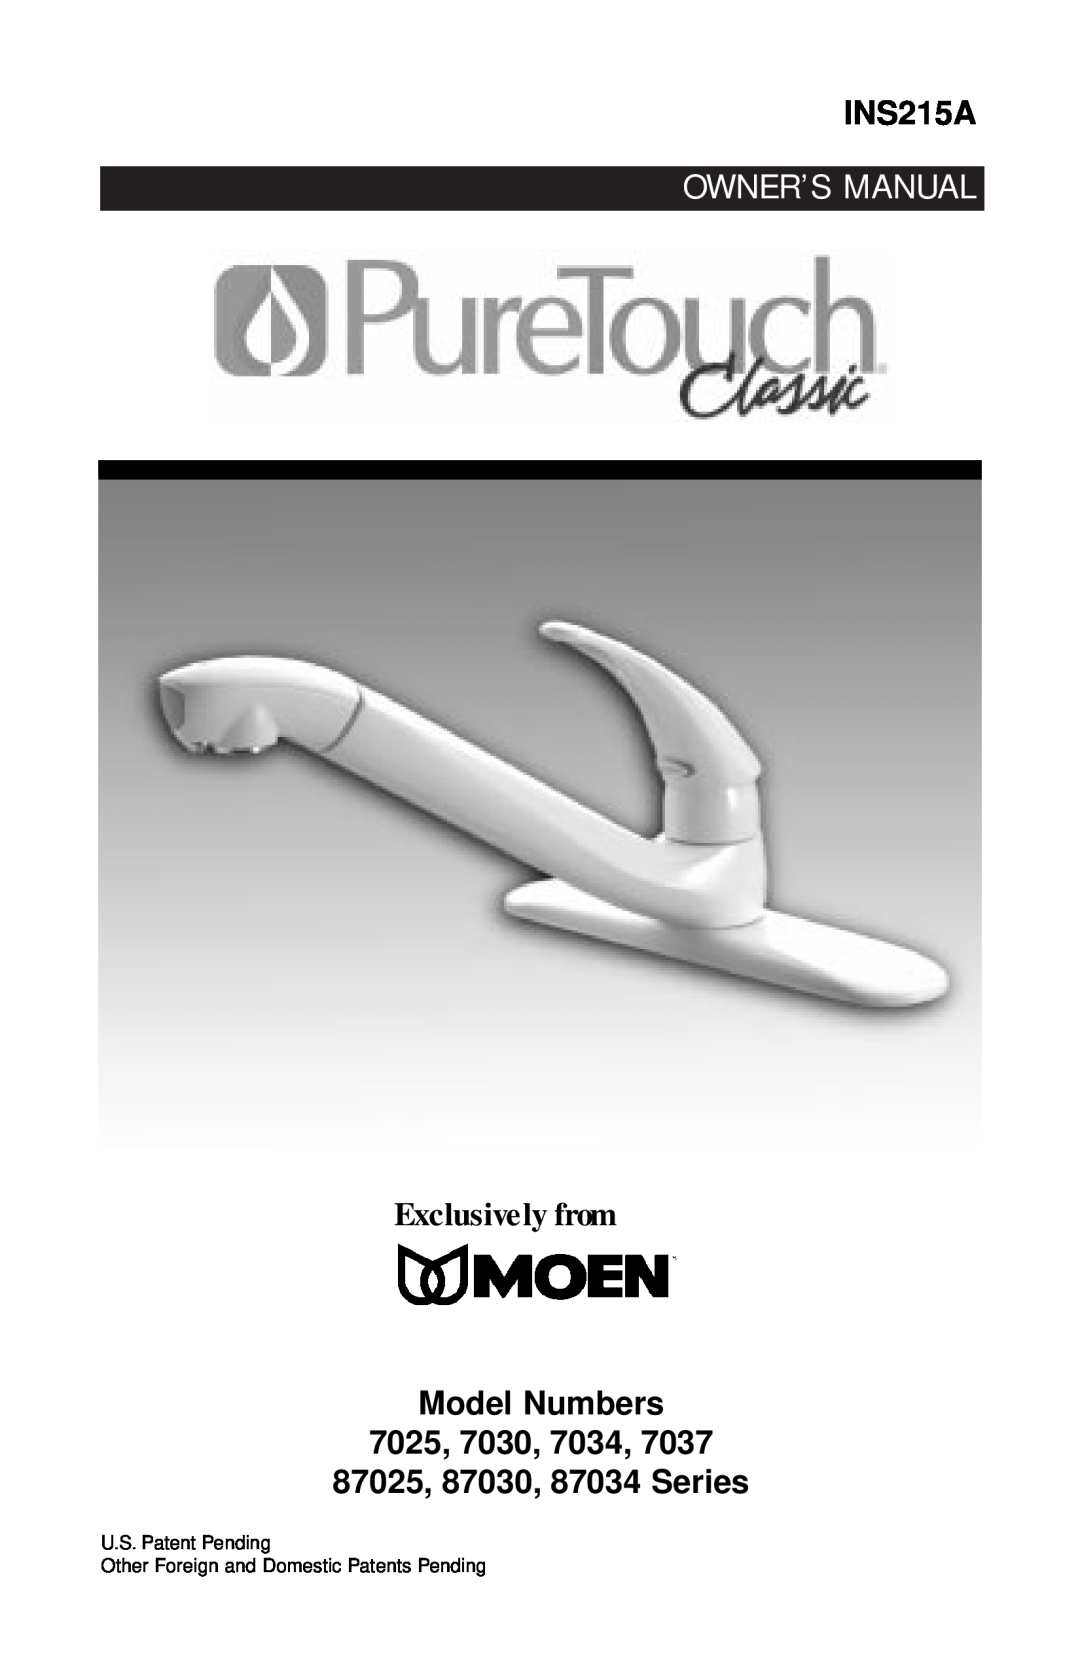 Moen 7037 87025 owner manual INS215A, Exclusively from, Model Numbers, 87025, 87030, 87034 Series 